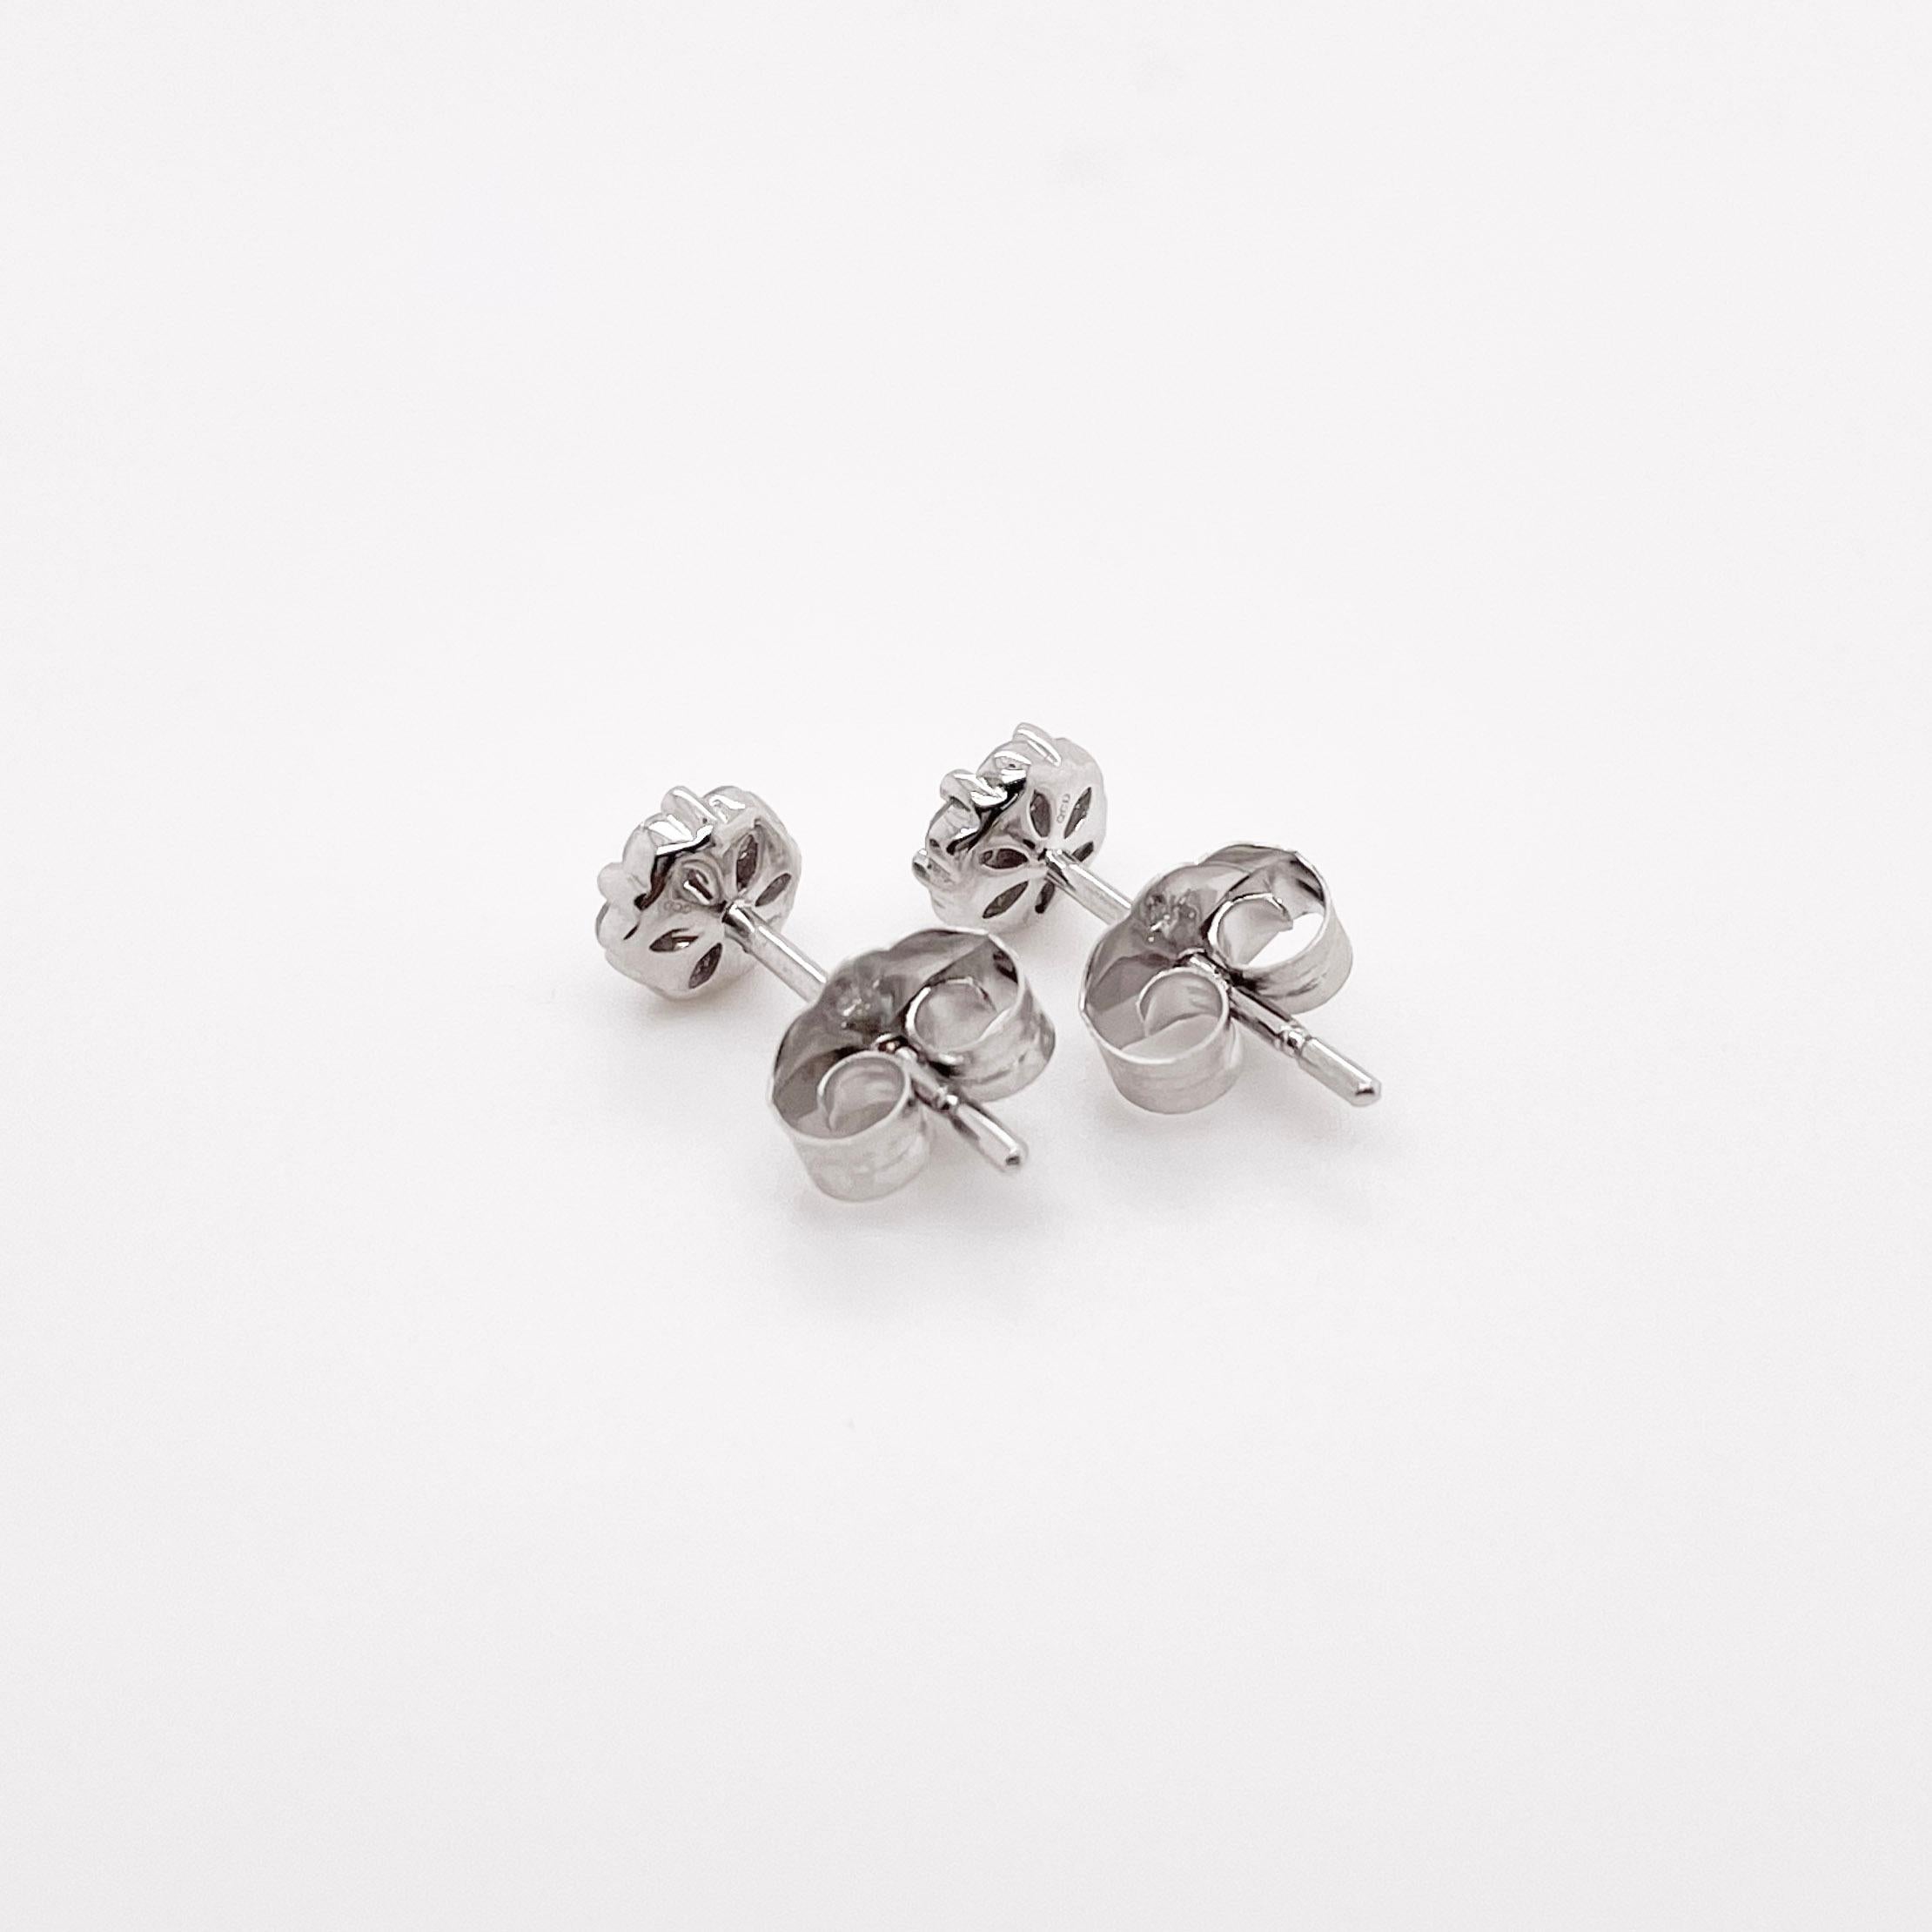 Round Cut Diamond Cluster Stud Earrings, White Gold, Floral Shape